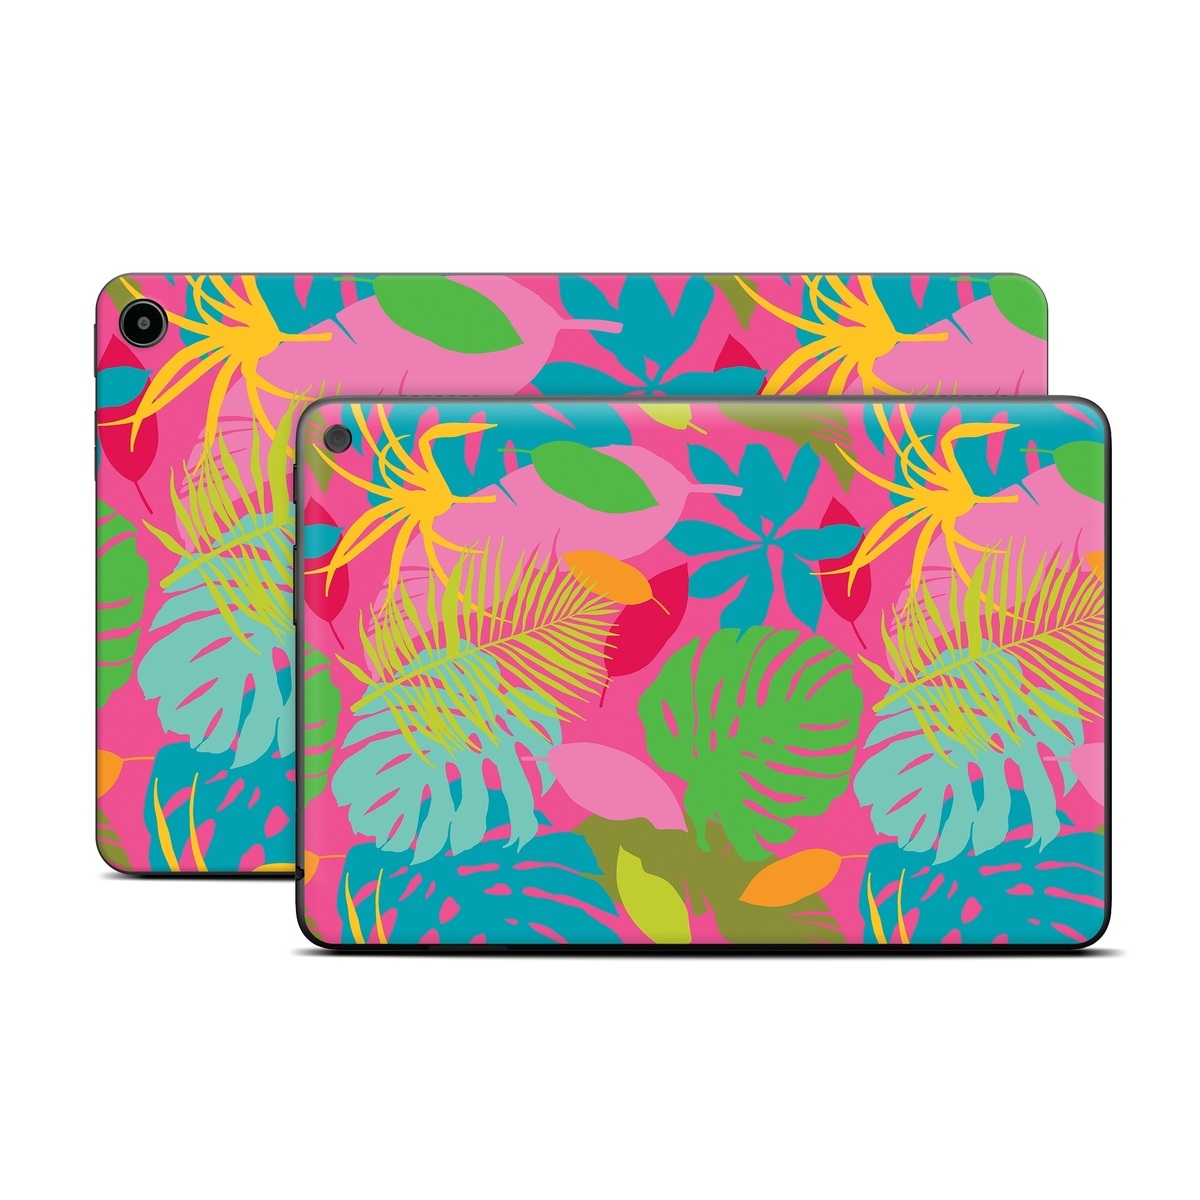  Skin design of Organism, Pink, Rectangle, Magenta, Aqua, Art, Symmetry, Pattern, Painting, Electric blue, with pink, green, blue, yellow, orange, red colors